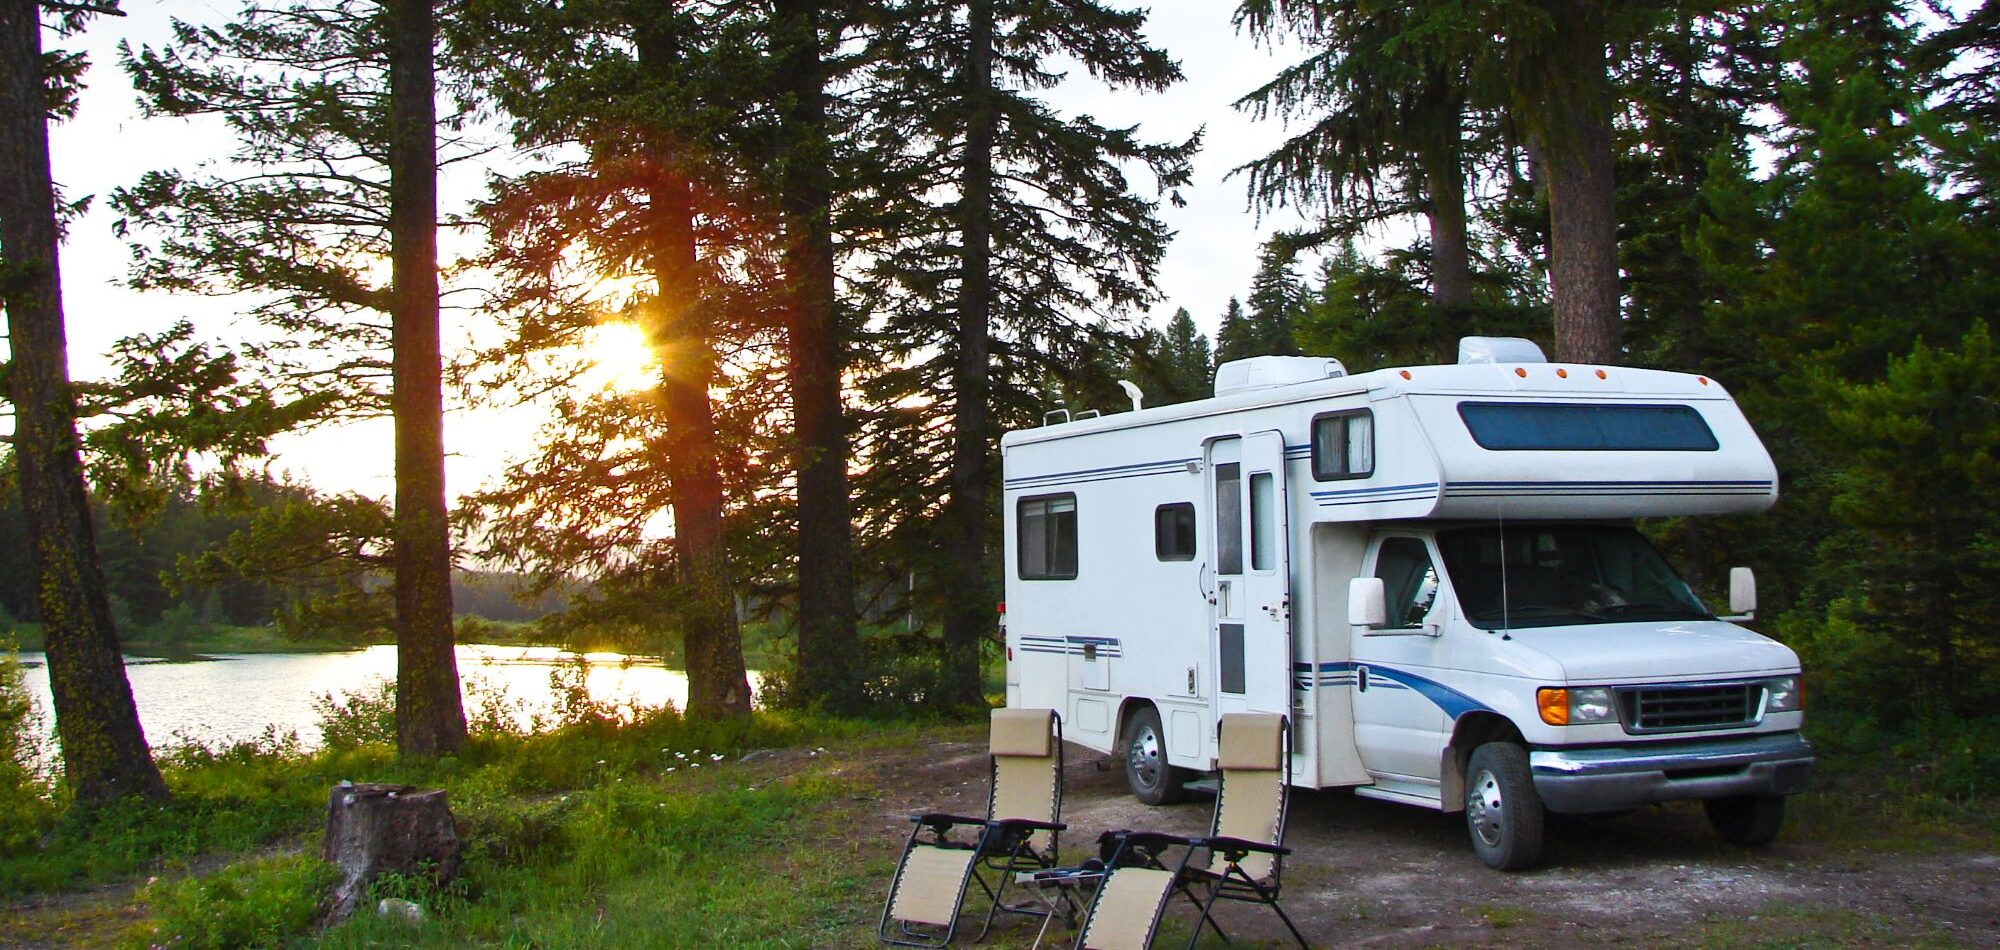 Does My Motorhome Insurance Cover My Personal Property Inside?